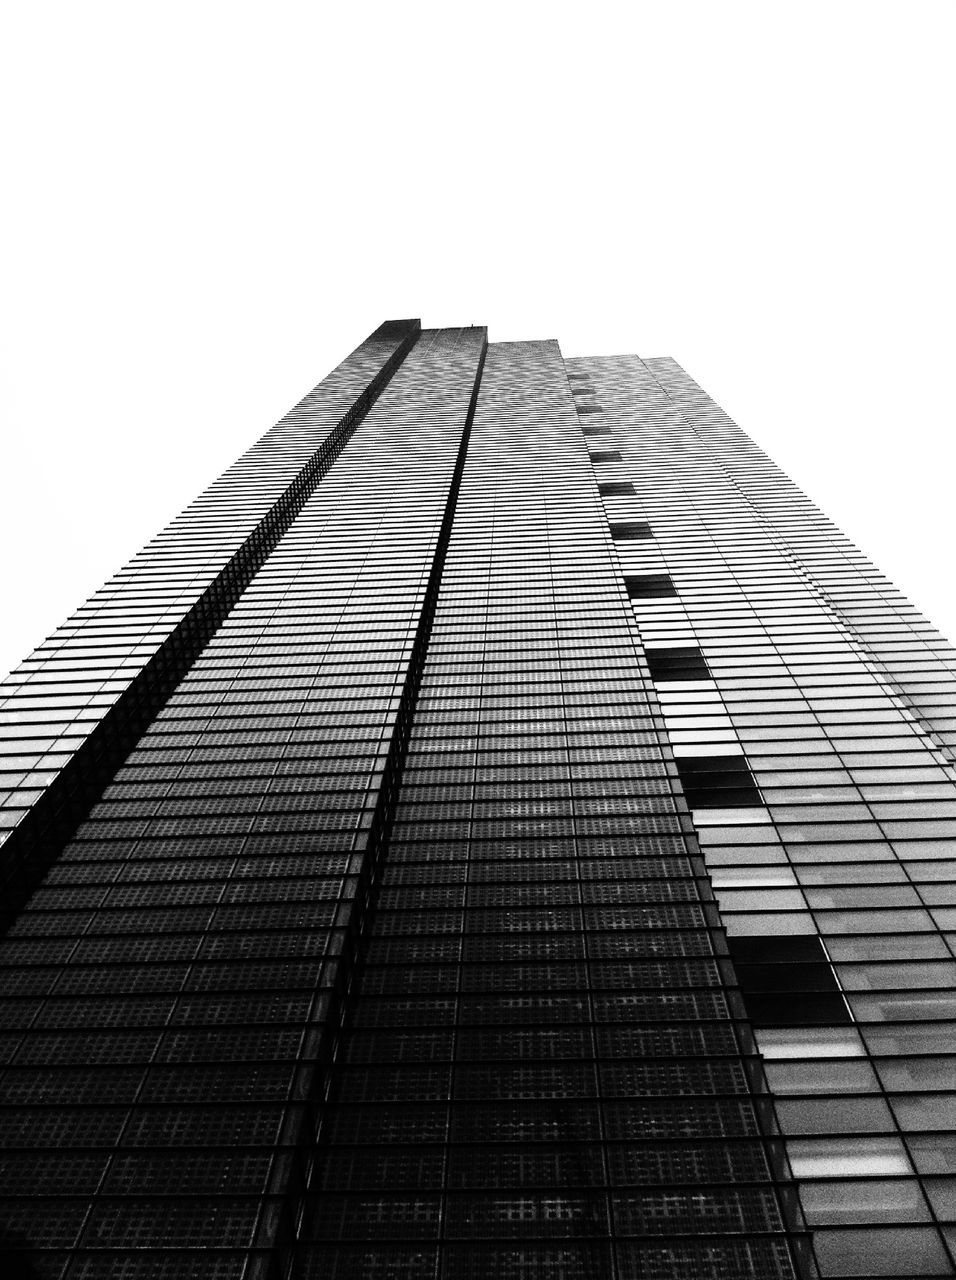 low angle view, architecture, building exterior, built structure, clear sky, tall - high, modern, tower, office building, skyscraper, building, city, tall, sky, day, glass - material, outdoors, no people, copy space, window